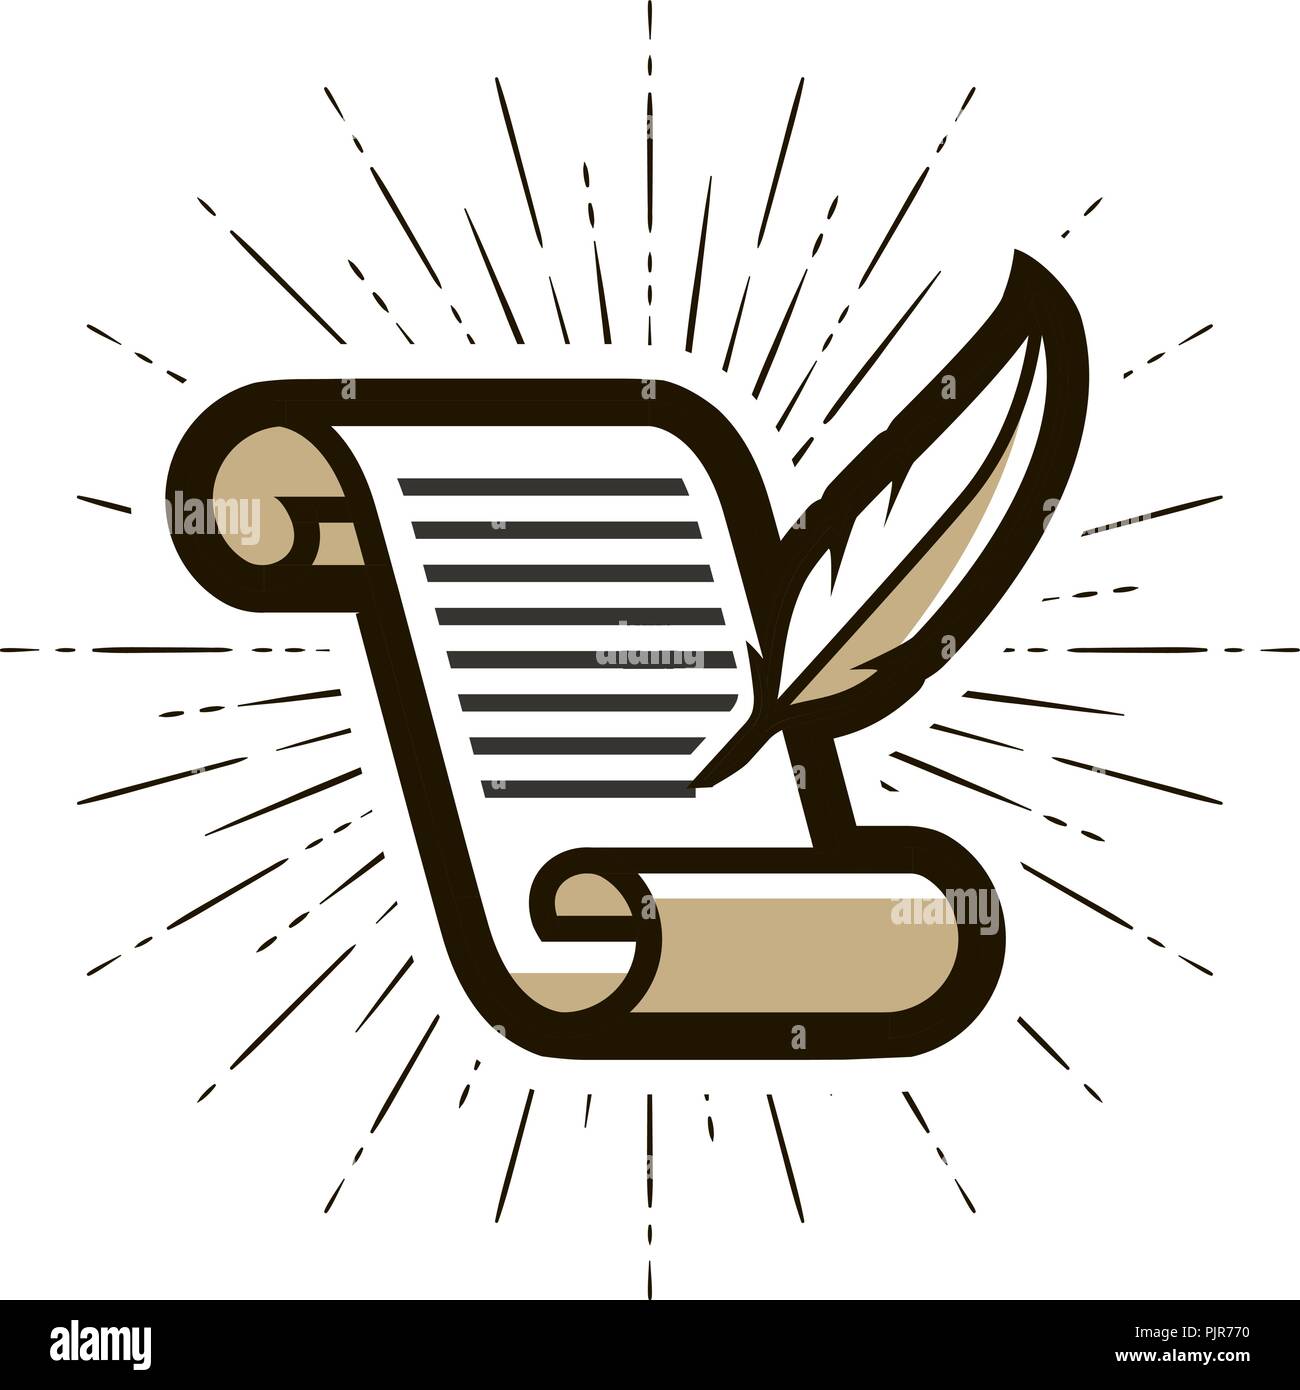 Document, contract logo or label. Literature, letter, quill pen and paper icon. Vector illustration Stock Vector